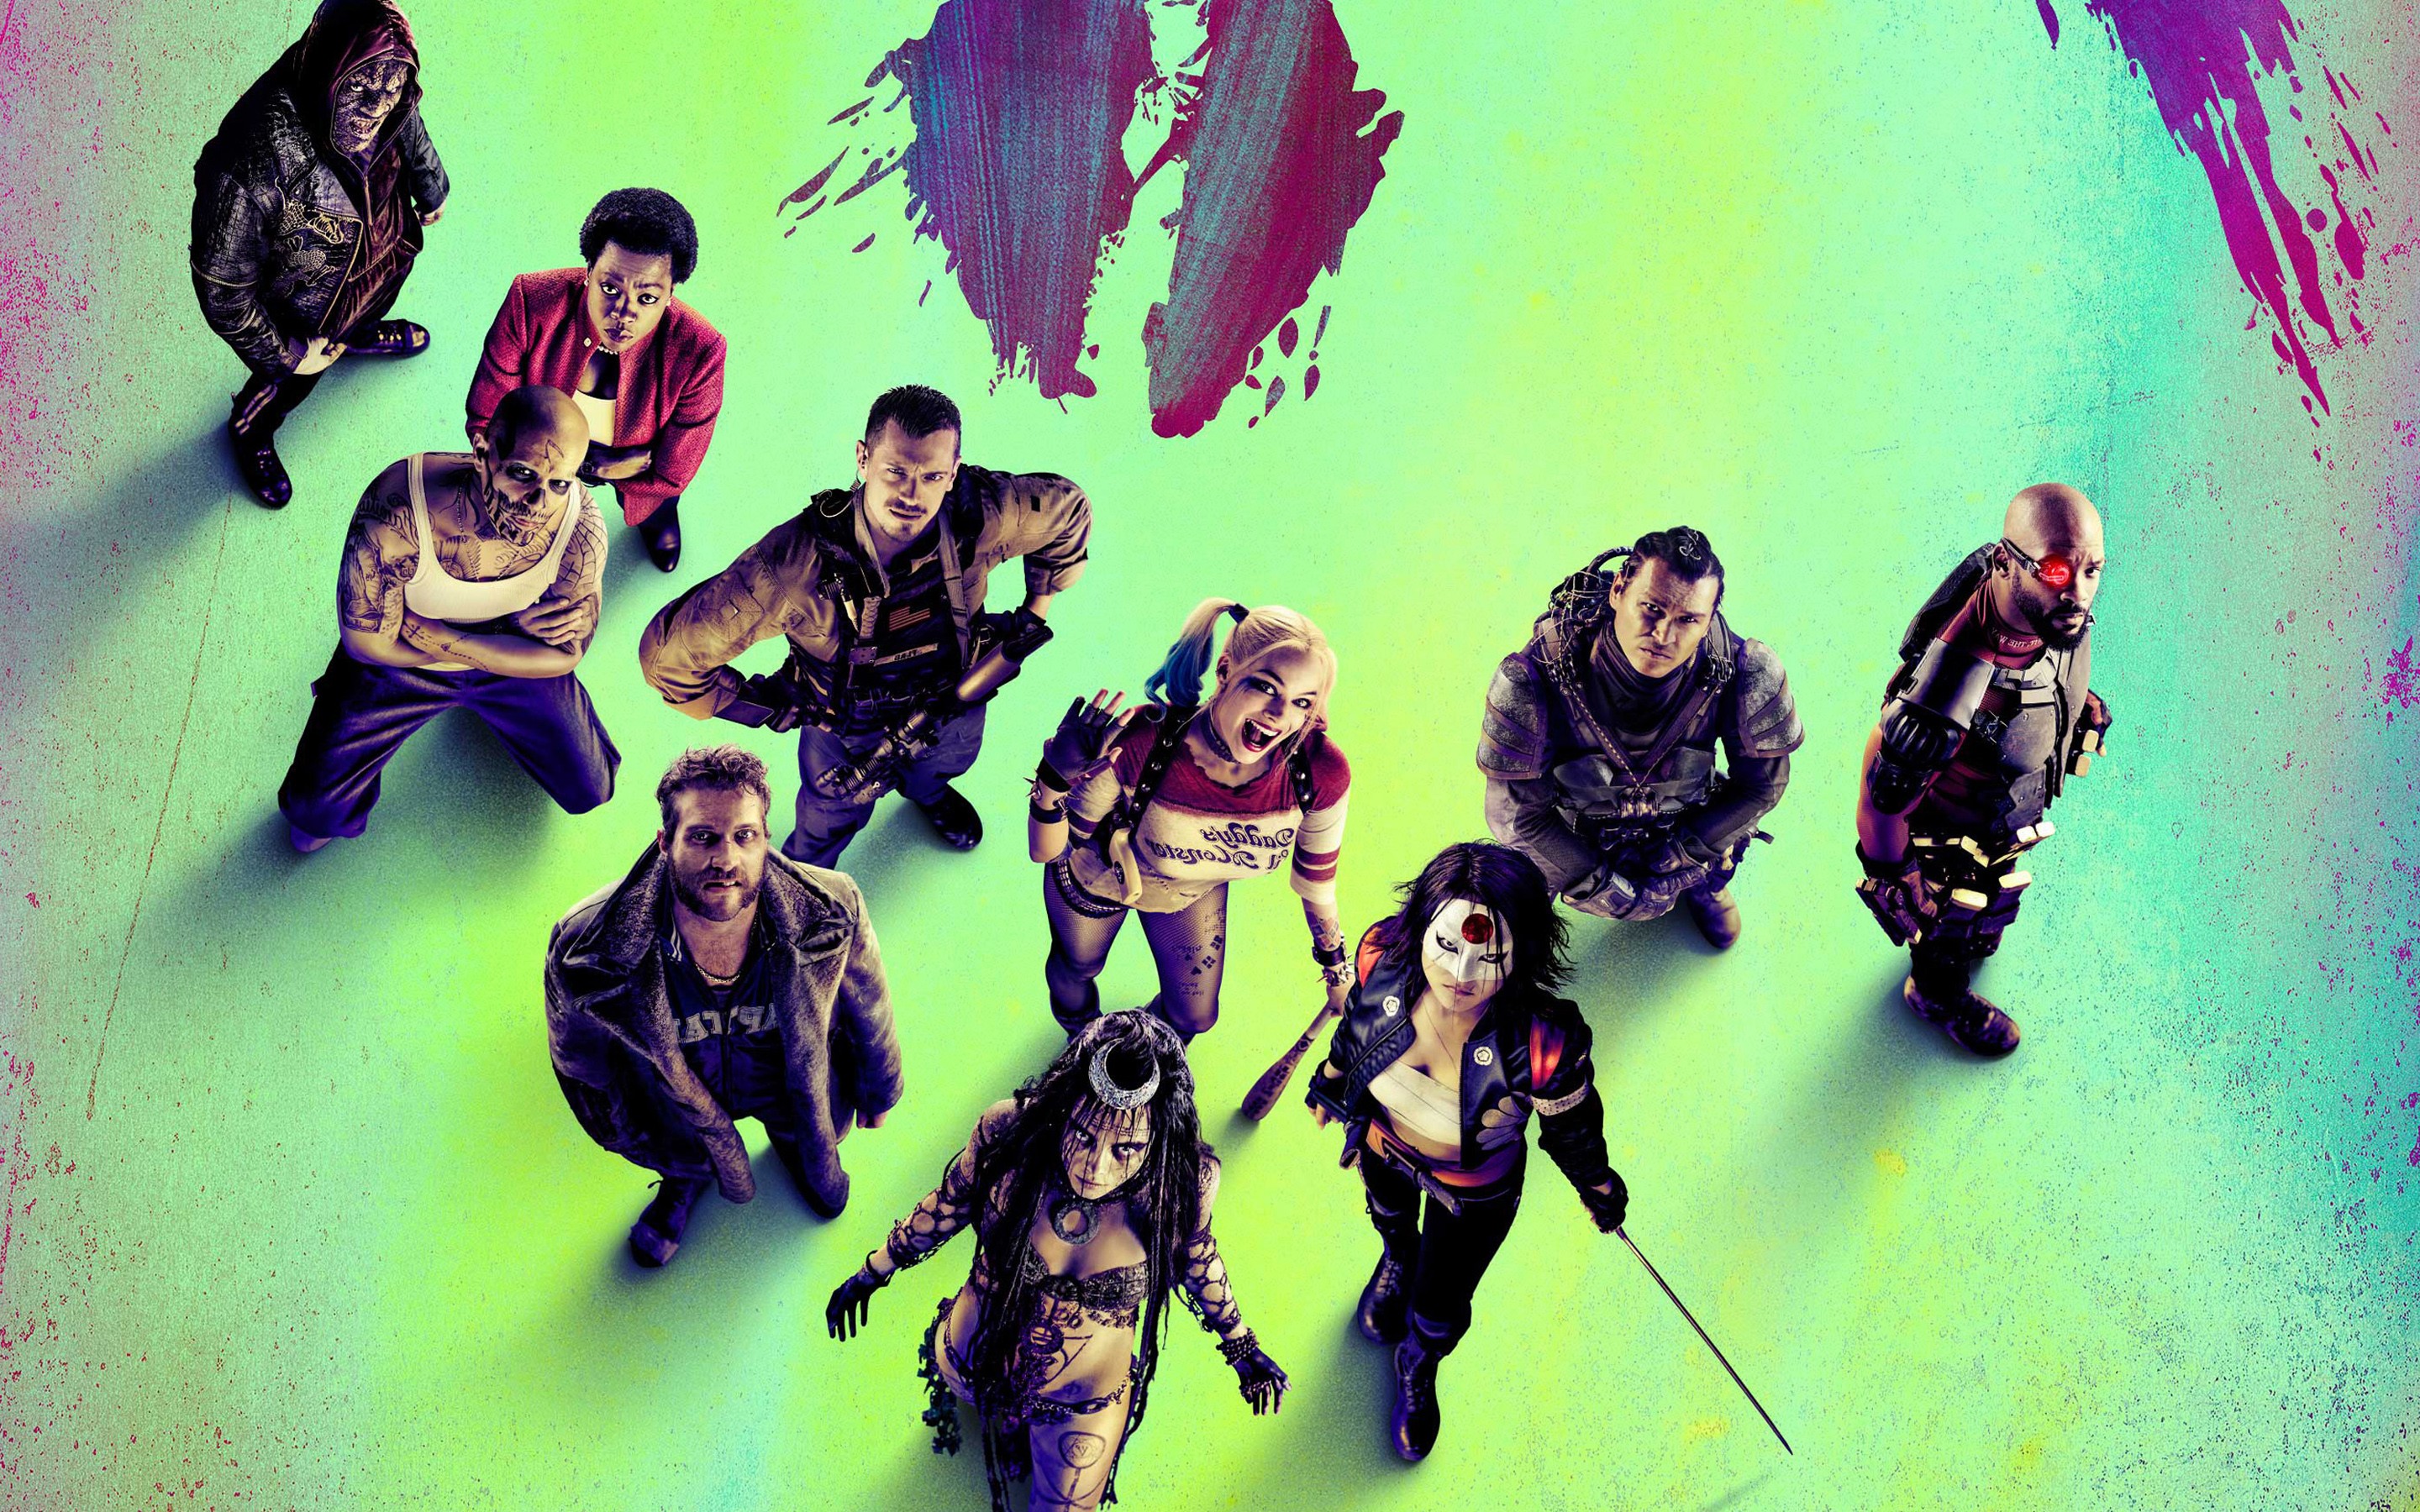 Suicide Squad Wallpaper Full HD Mlt9wo1 4usky